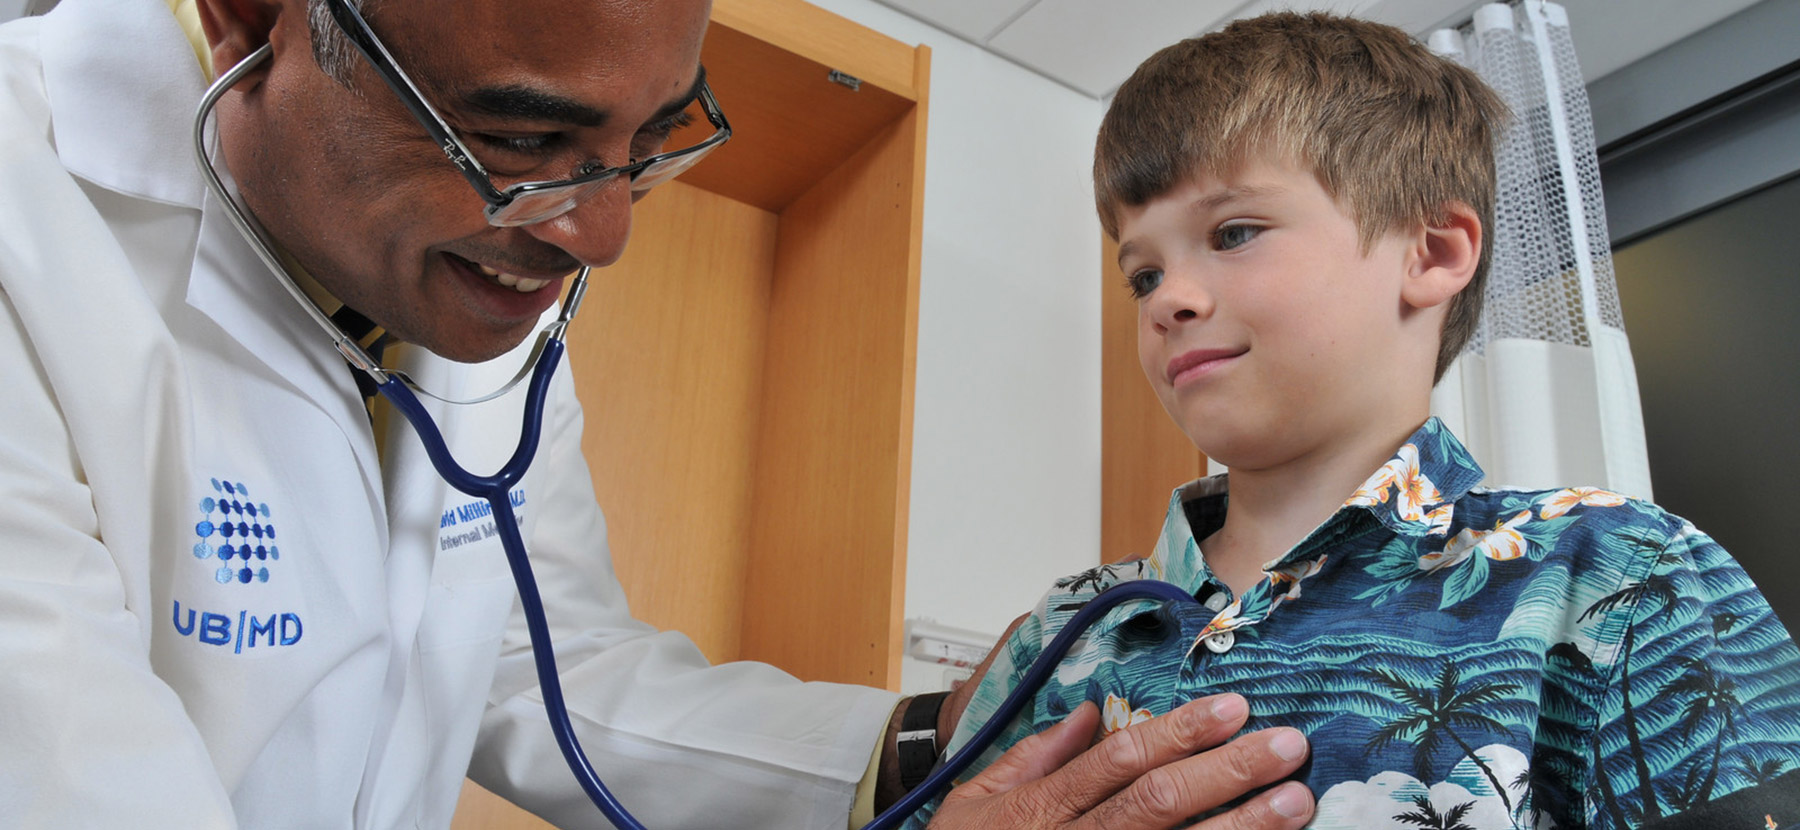 Doctor listening to child's heart